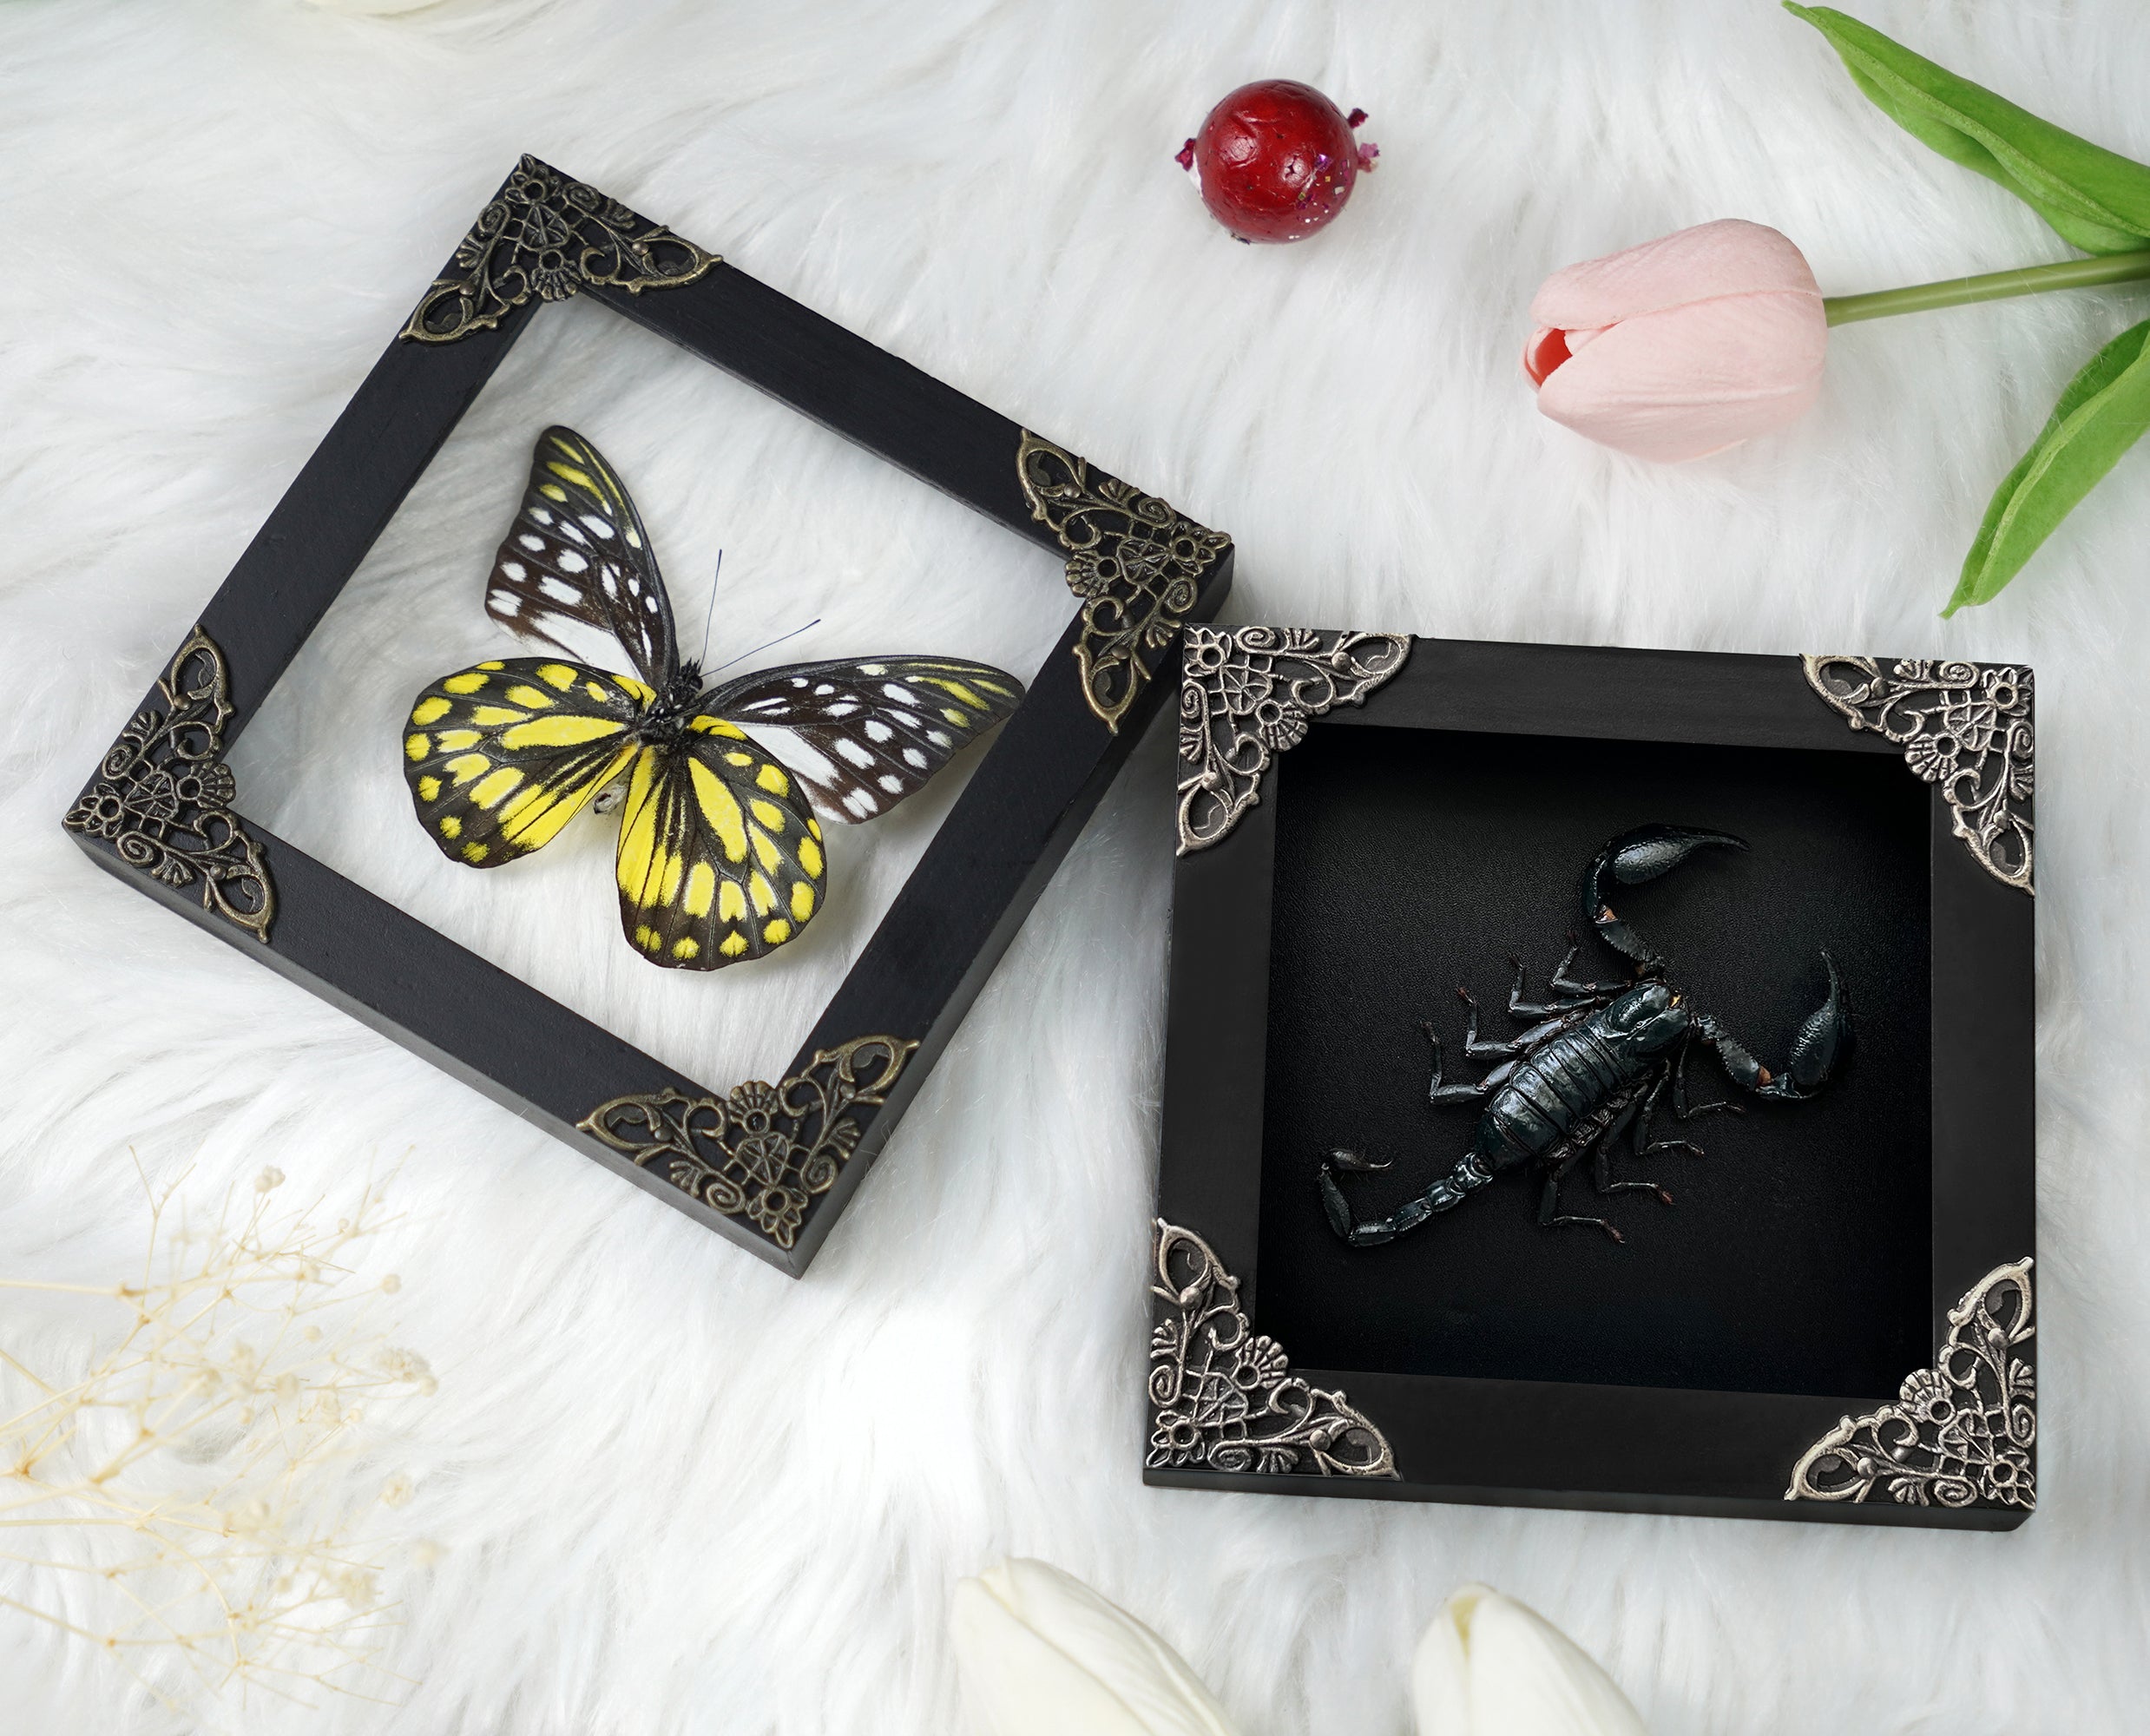 Taxidermy Scorpion & Butterfly Framed Crystal Display Shelf for Insect Gothic Decor K12-51DE10KINH